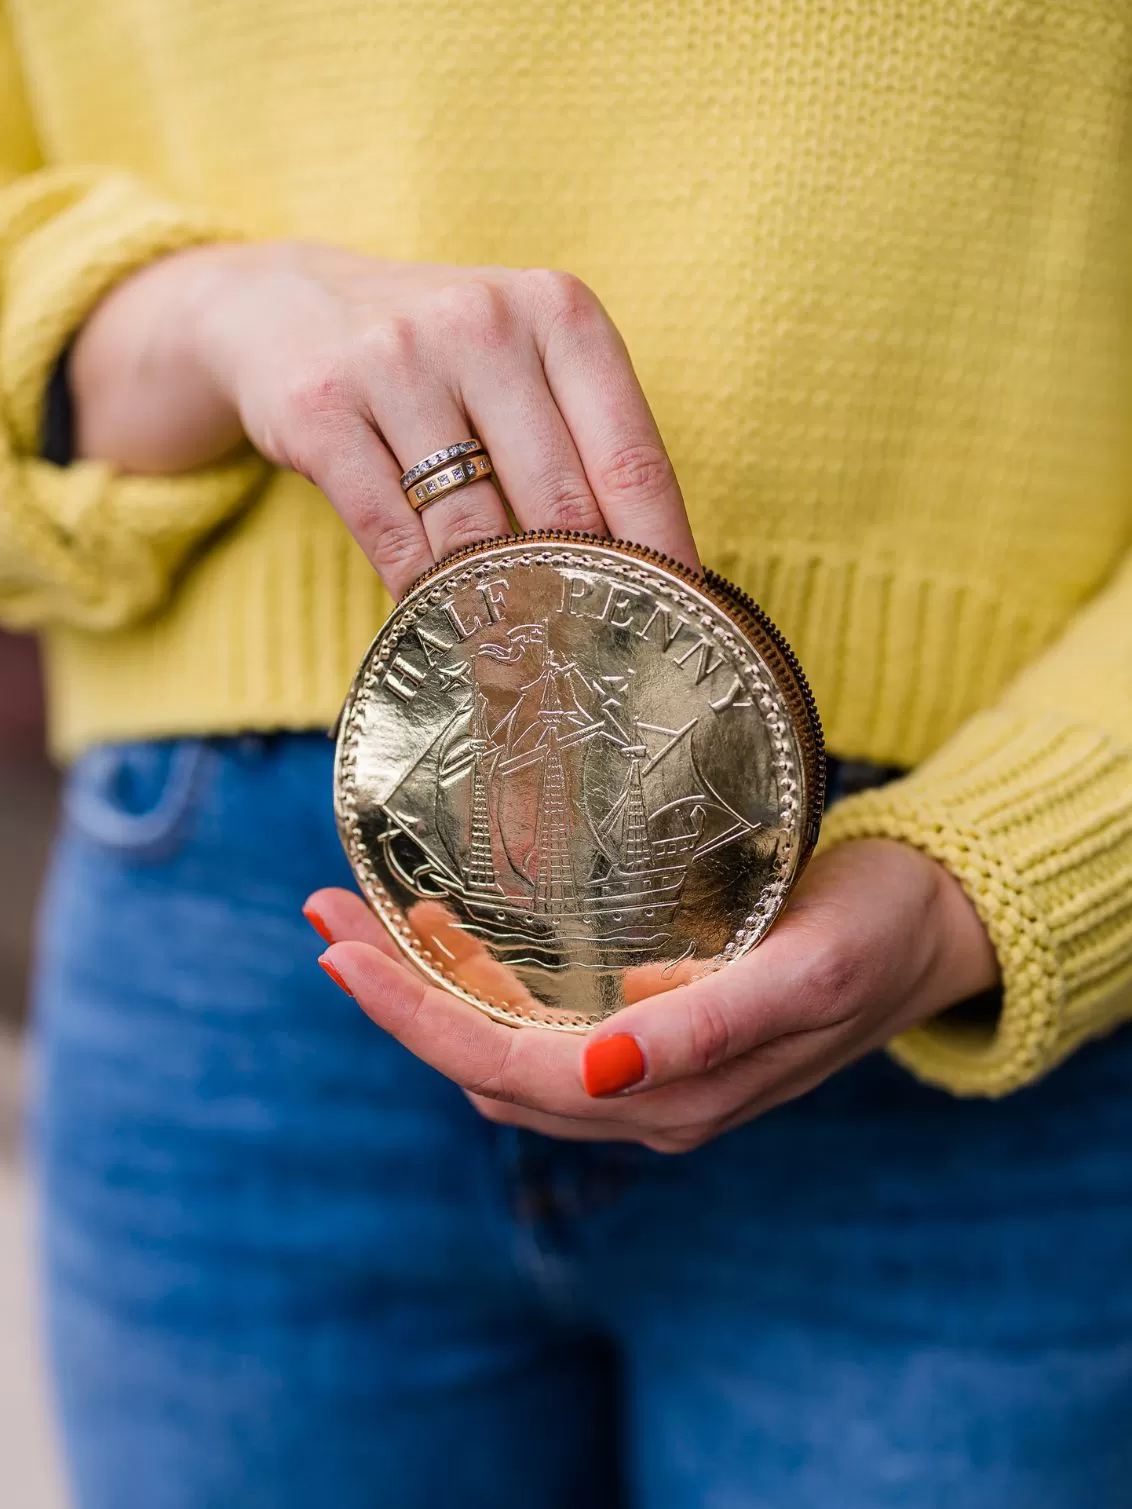 Fun Sized Gold Leather Half Penny Purse seen held by someone wearing a yellow jumper.